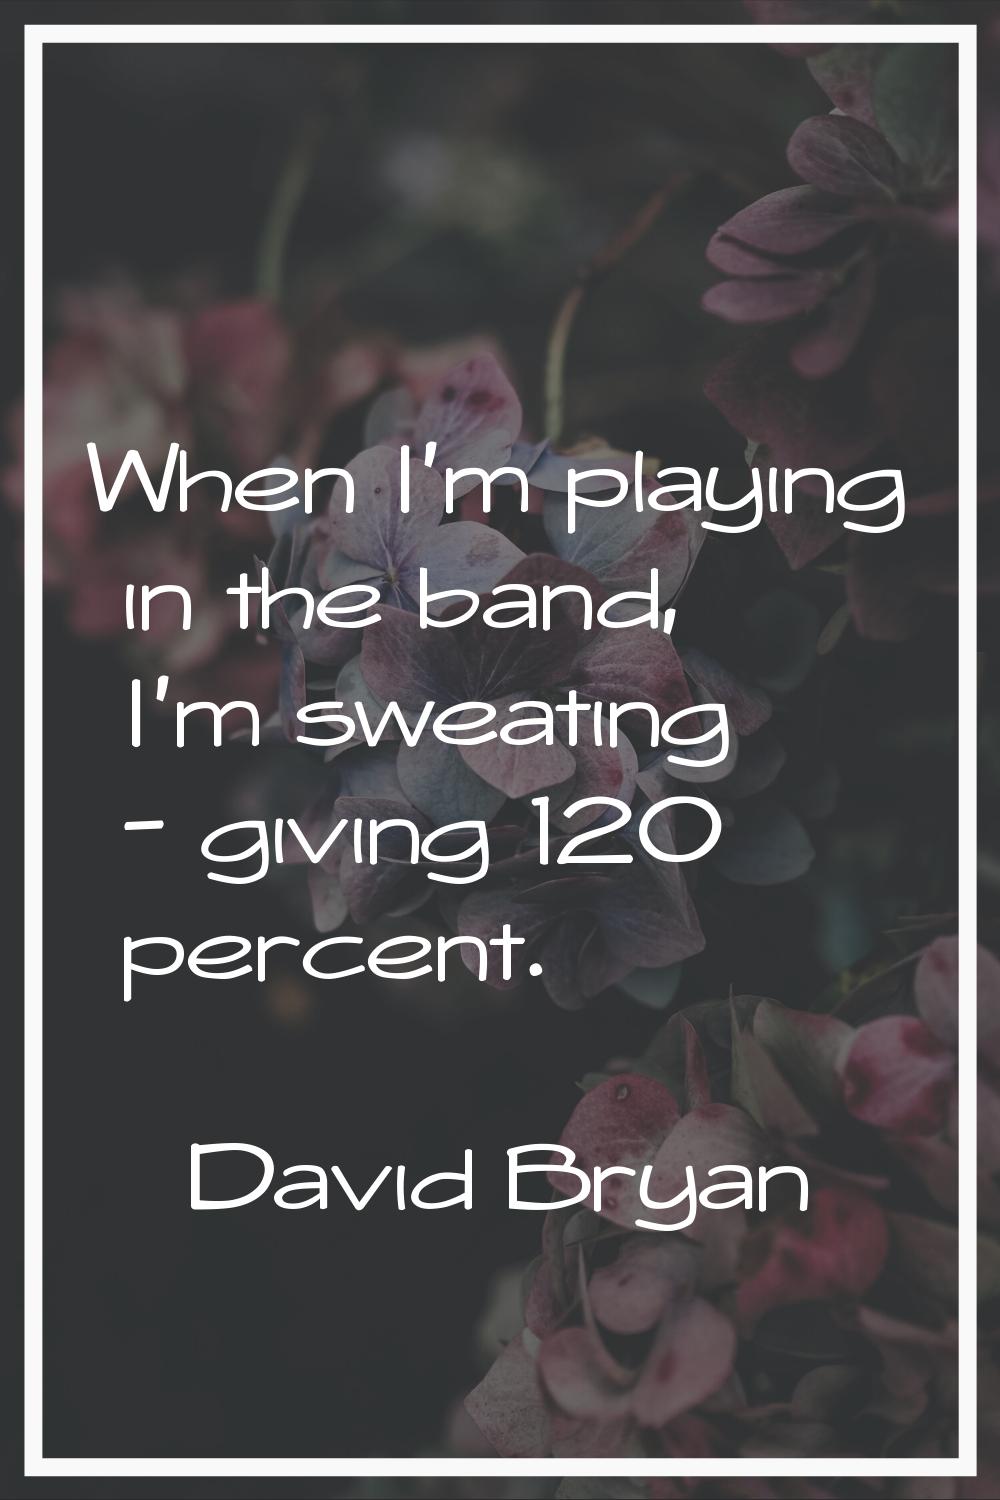 When I'm playing in the band, I'm sweating - giving 120 percent.